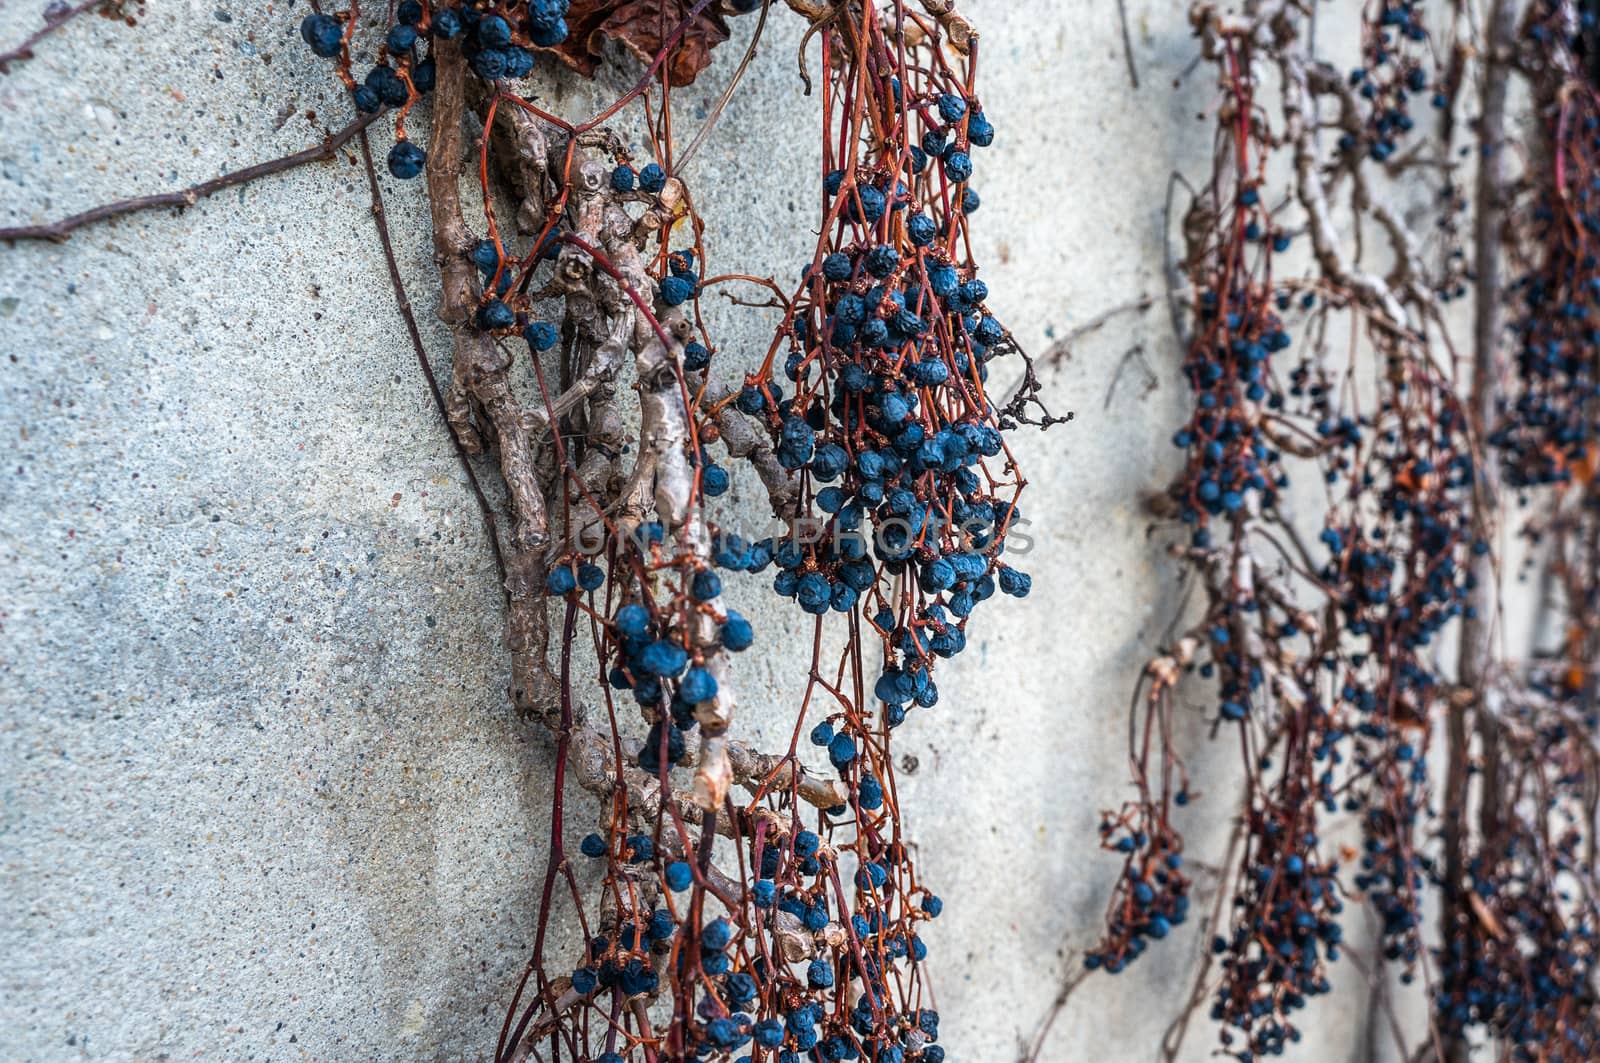 Dried vibrant blue grapes on brown and orange vines against a light grey concrete wall. Macrophotography with blurred background shot in daylight.